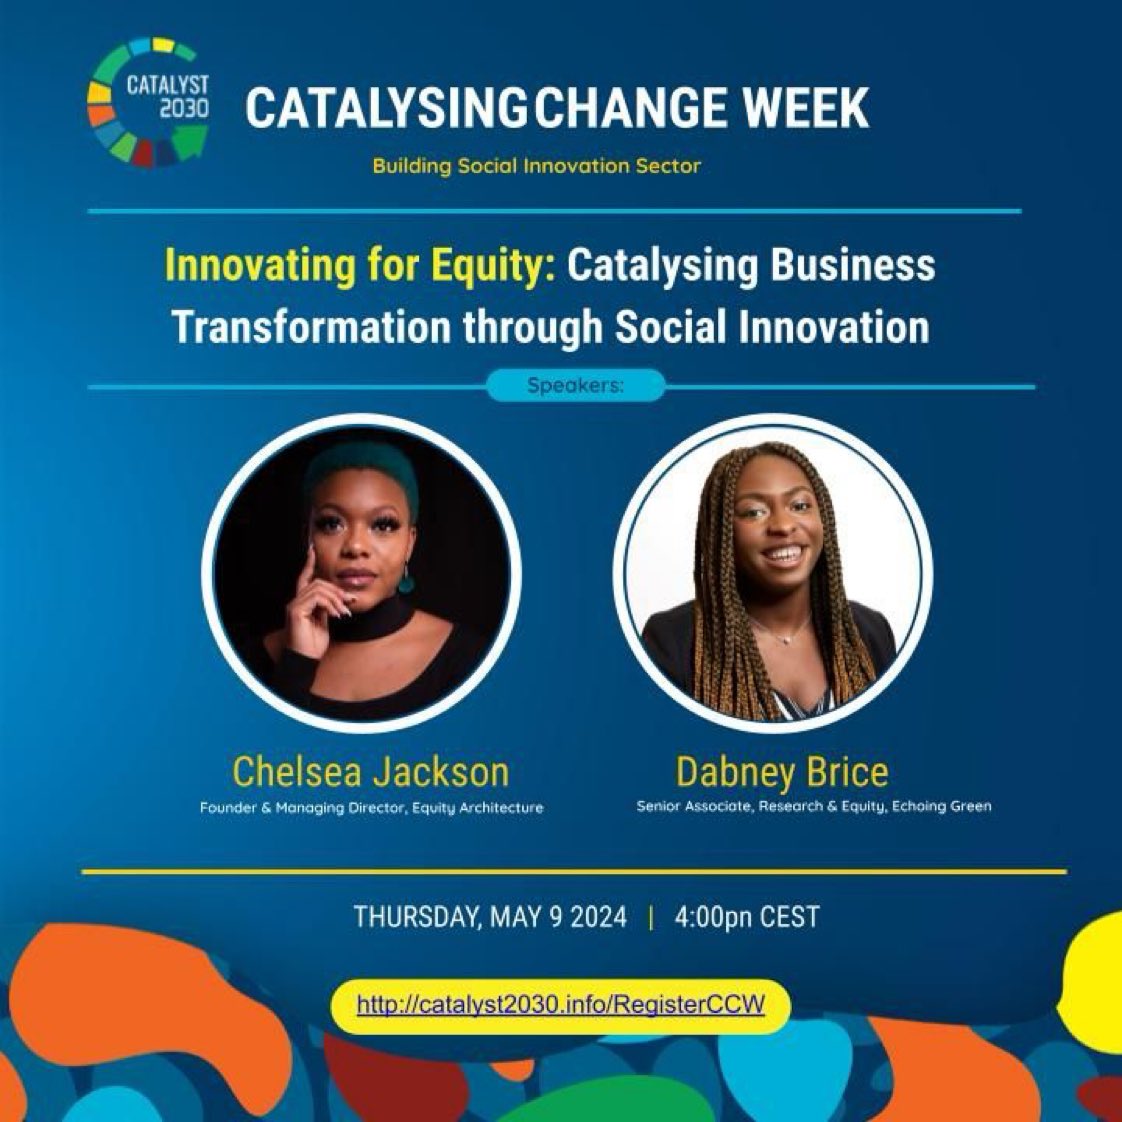 Don’t miss the Catalysing Change Week 🔥.
Building the Social Innovation Sector and Innovating for Equity.
It’s happening Thursday, May 9th, 4:00 pm CEST. 
Be a part of this educative event. Sign up here : catalyst2030.info/RegisterCCW #CatalysingChange 
#Catalyst2030